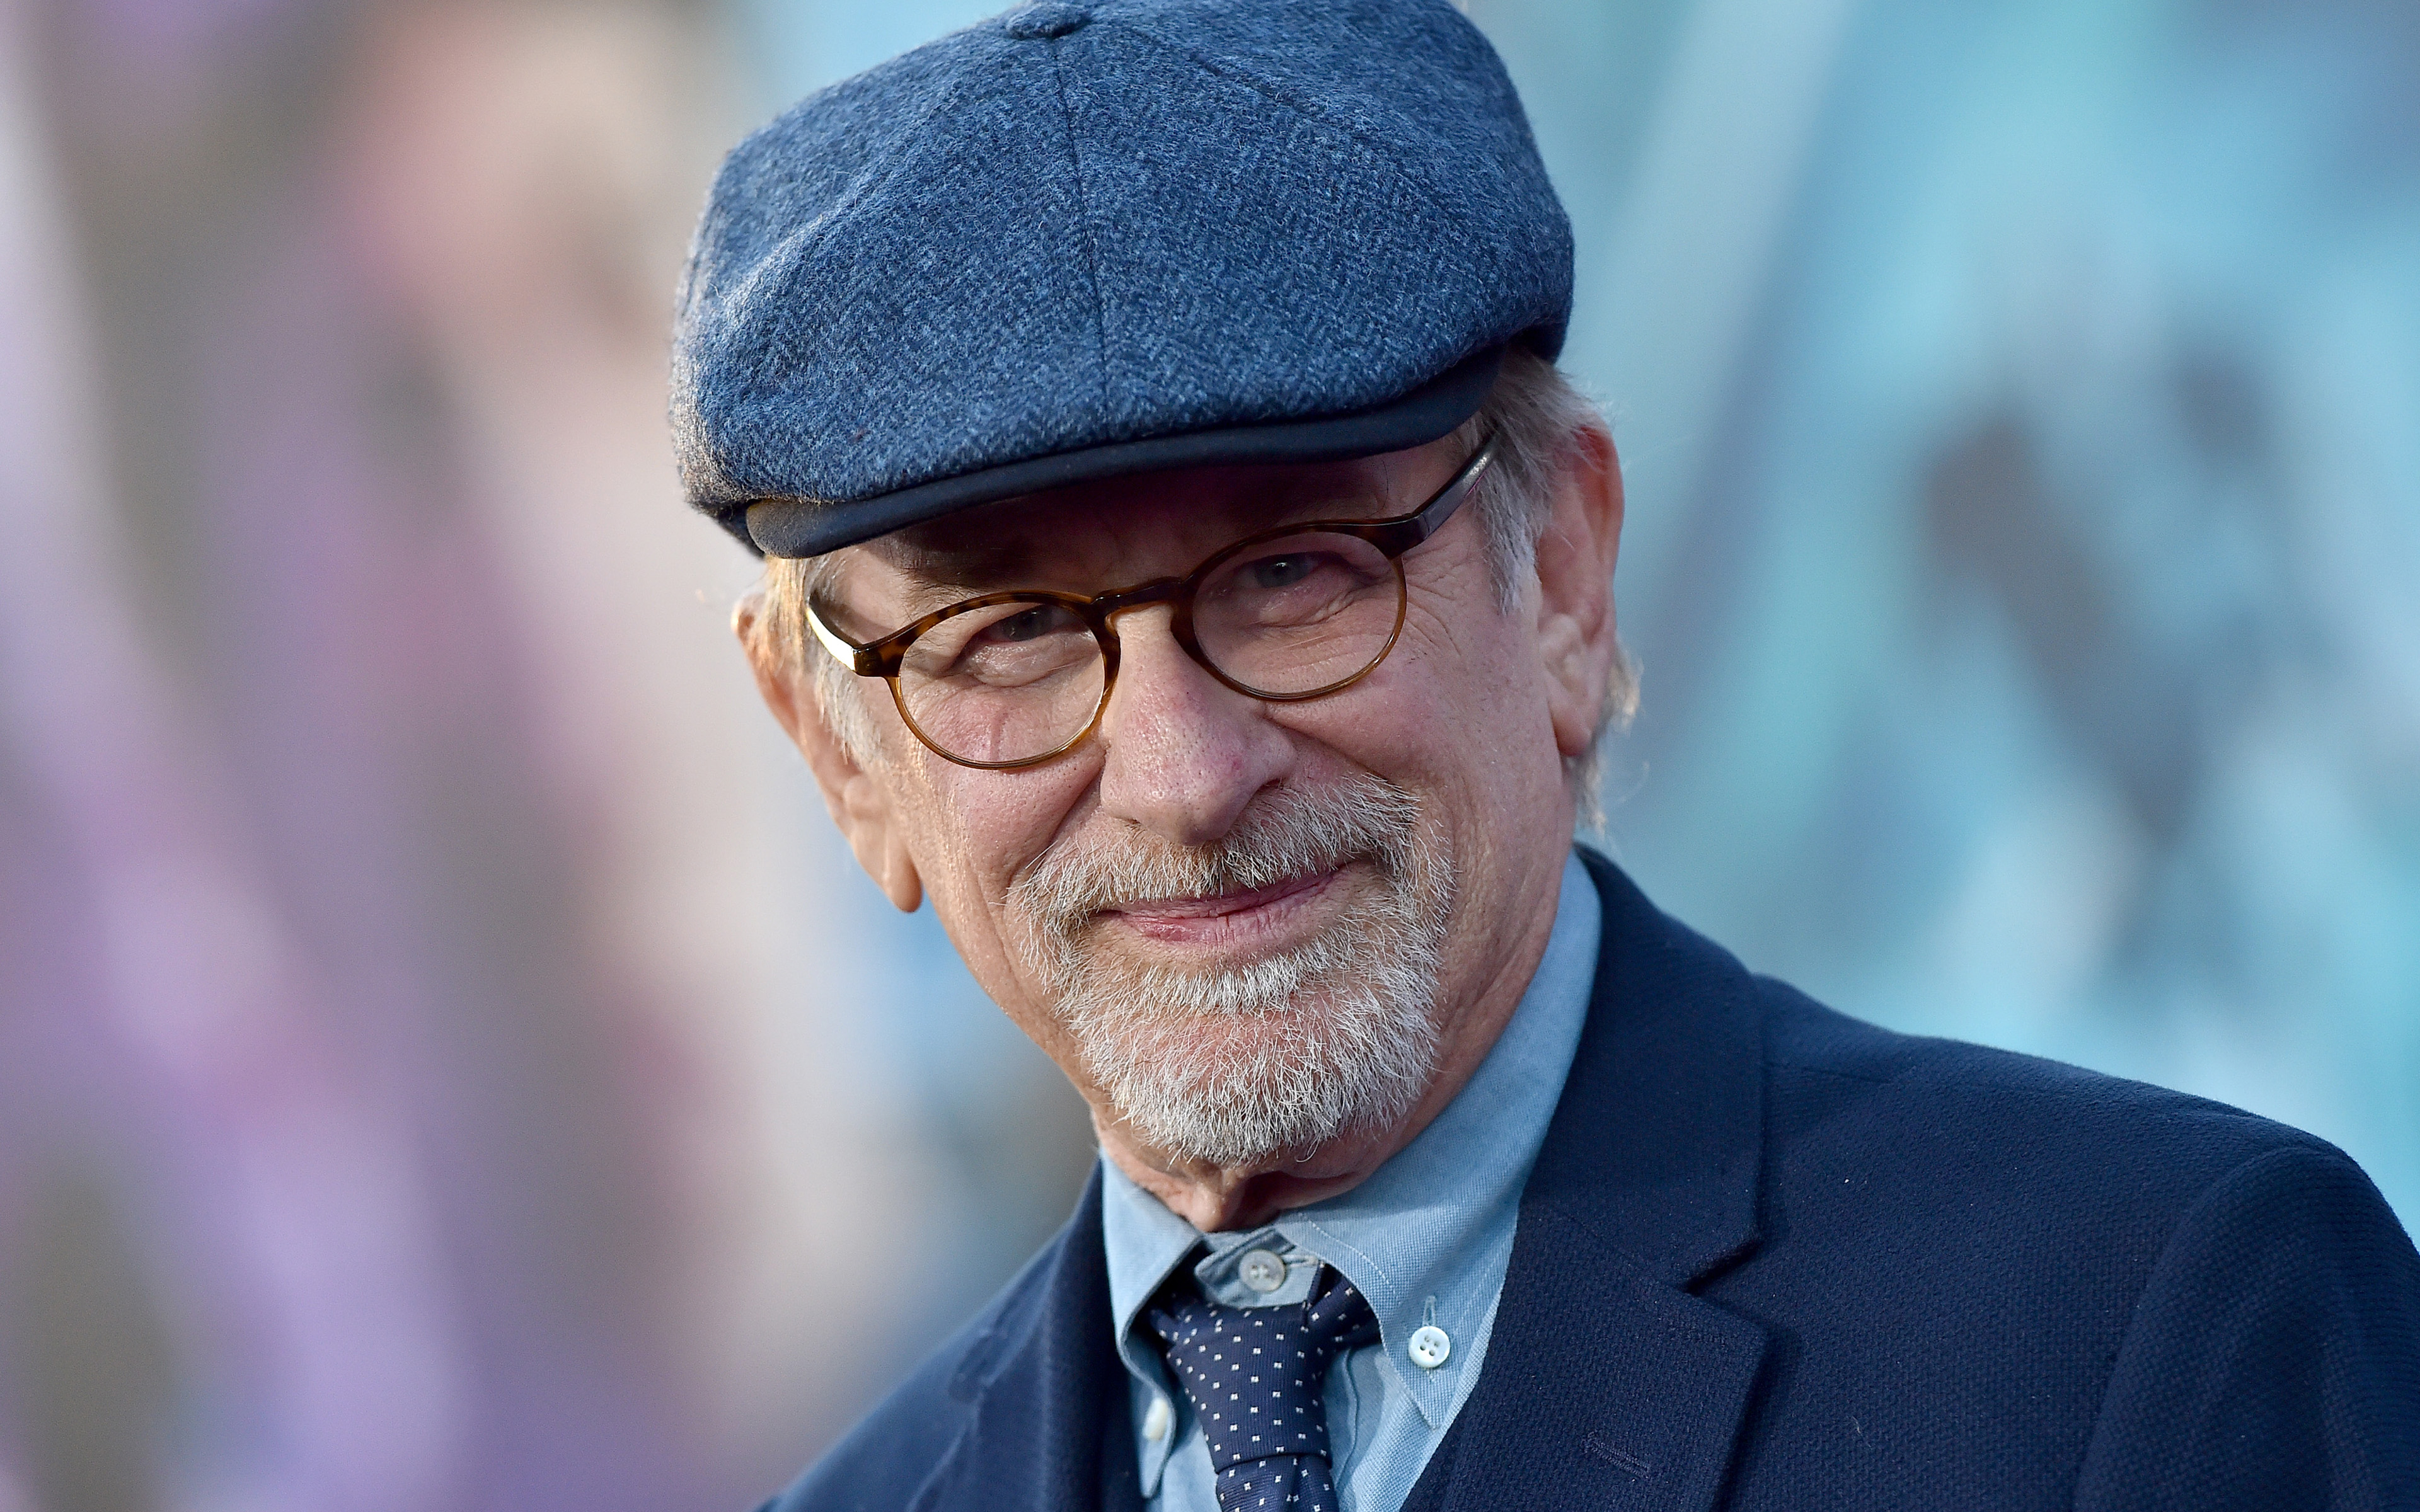 Download wallpaper Steven Spielberg, 4k, American film director, portrait, Hollywood for desktop with resolution 3840x2400. High Quality HD picture wallpaper